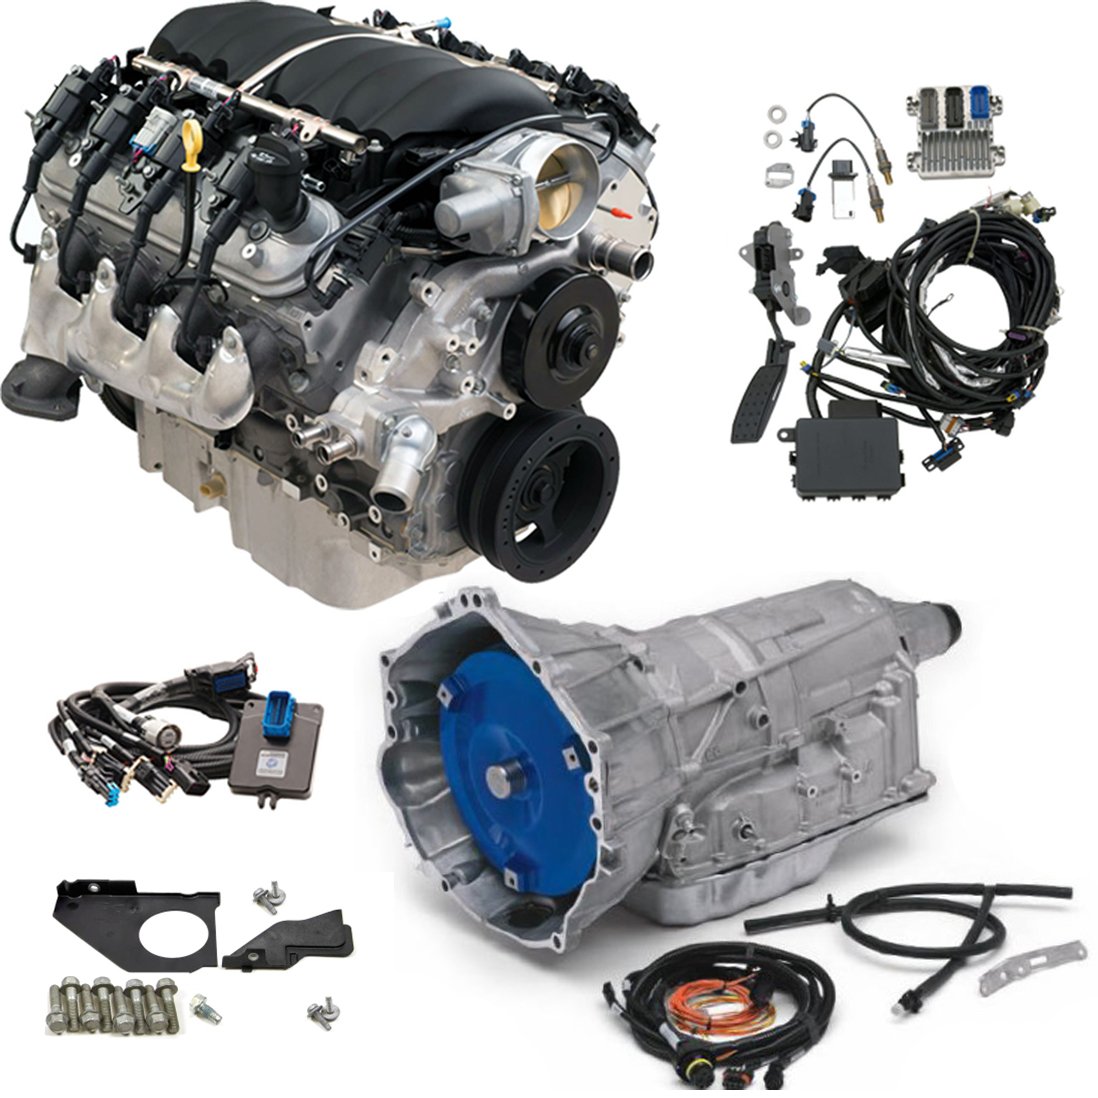 LS376/480 6.2L Connect & Cruise Powertrain System with Supermatic 6L80-E Automatic Transmission